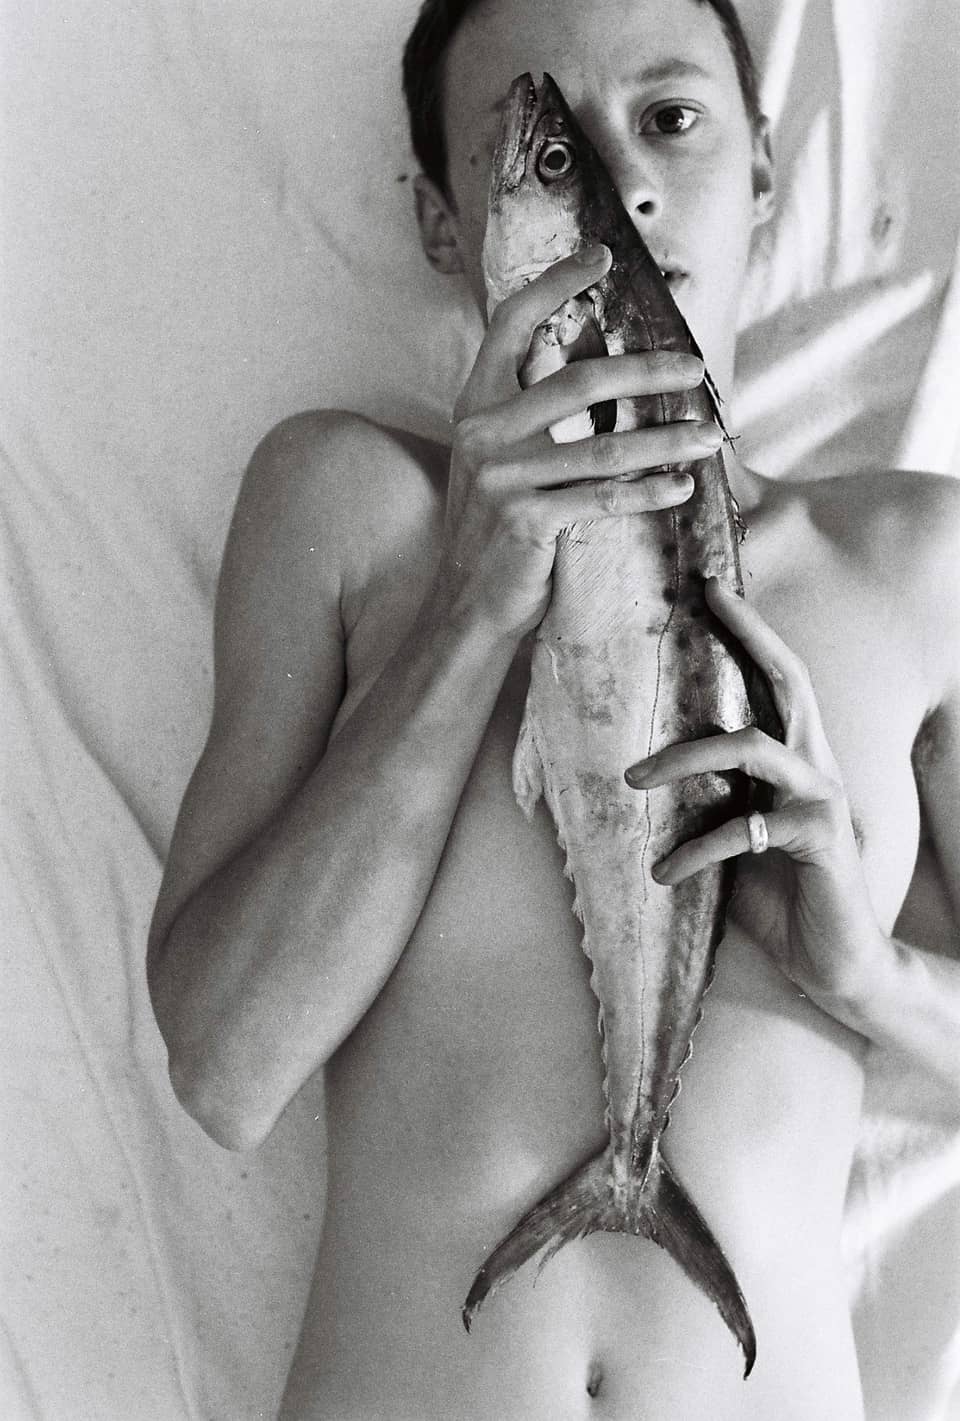 A nude lying on their back, holding a fish. The fish’s eye covers one of theirs.